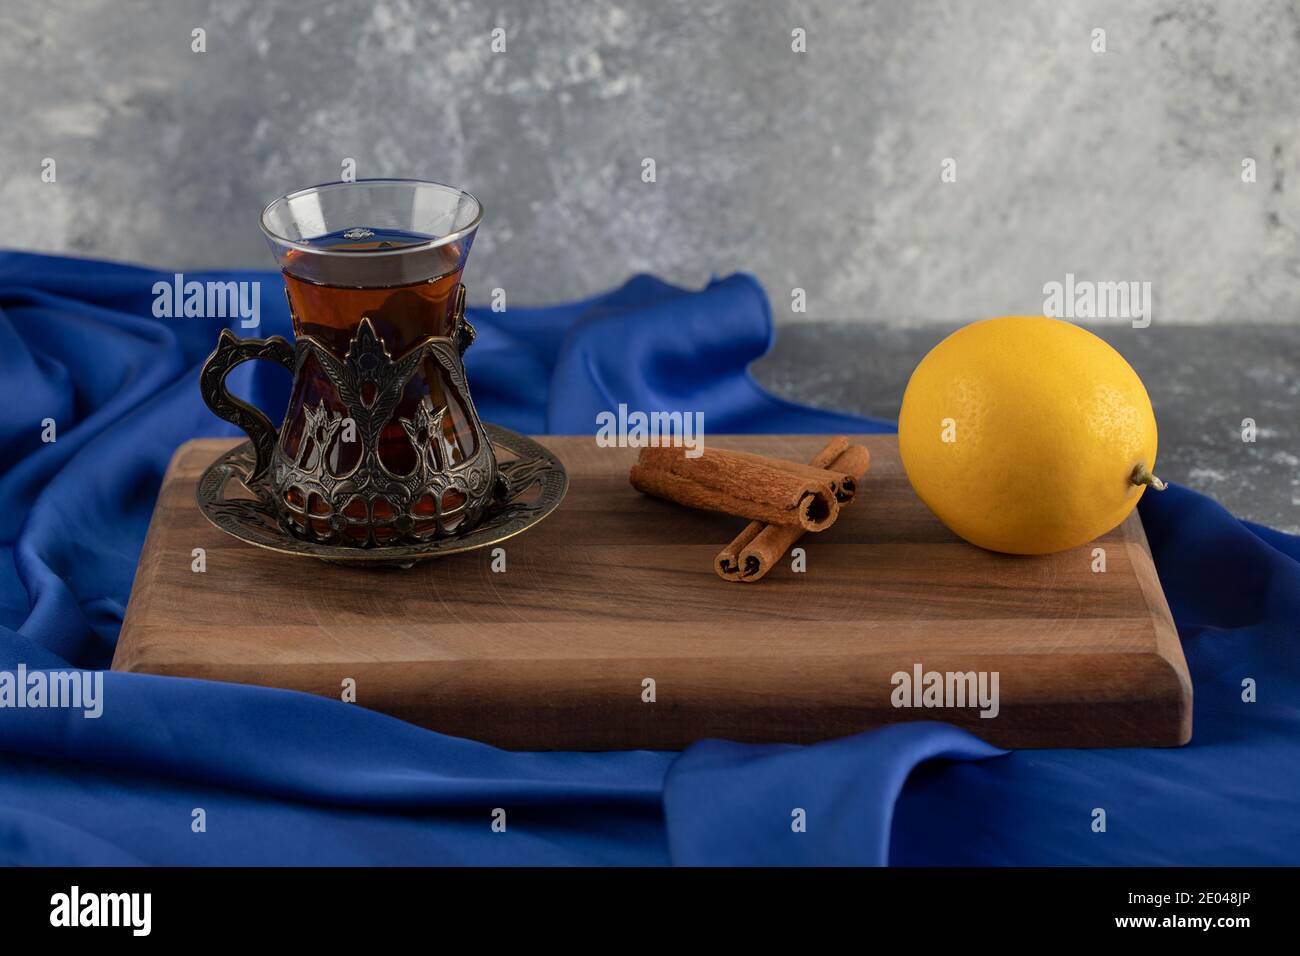 A glass tea with cinnamon sticks on a wooden cutting board Stock Photo